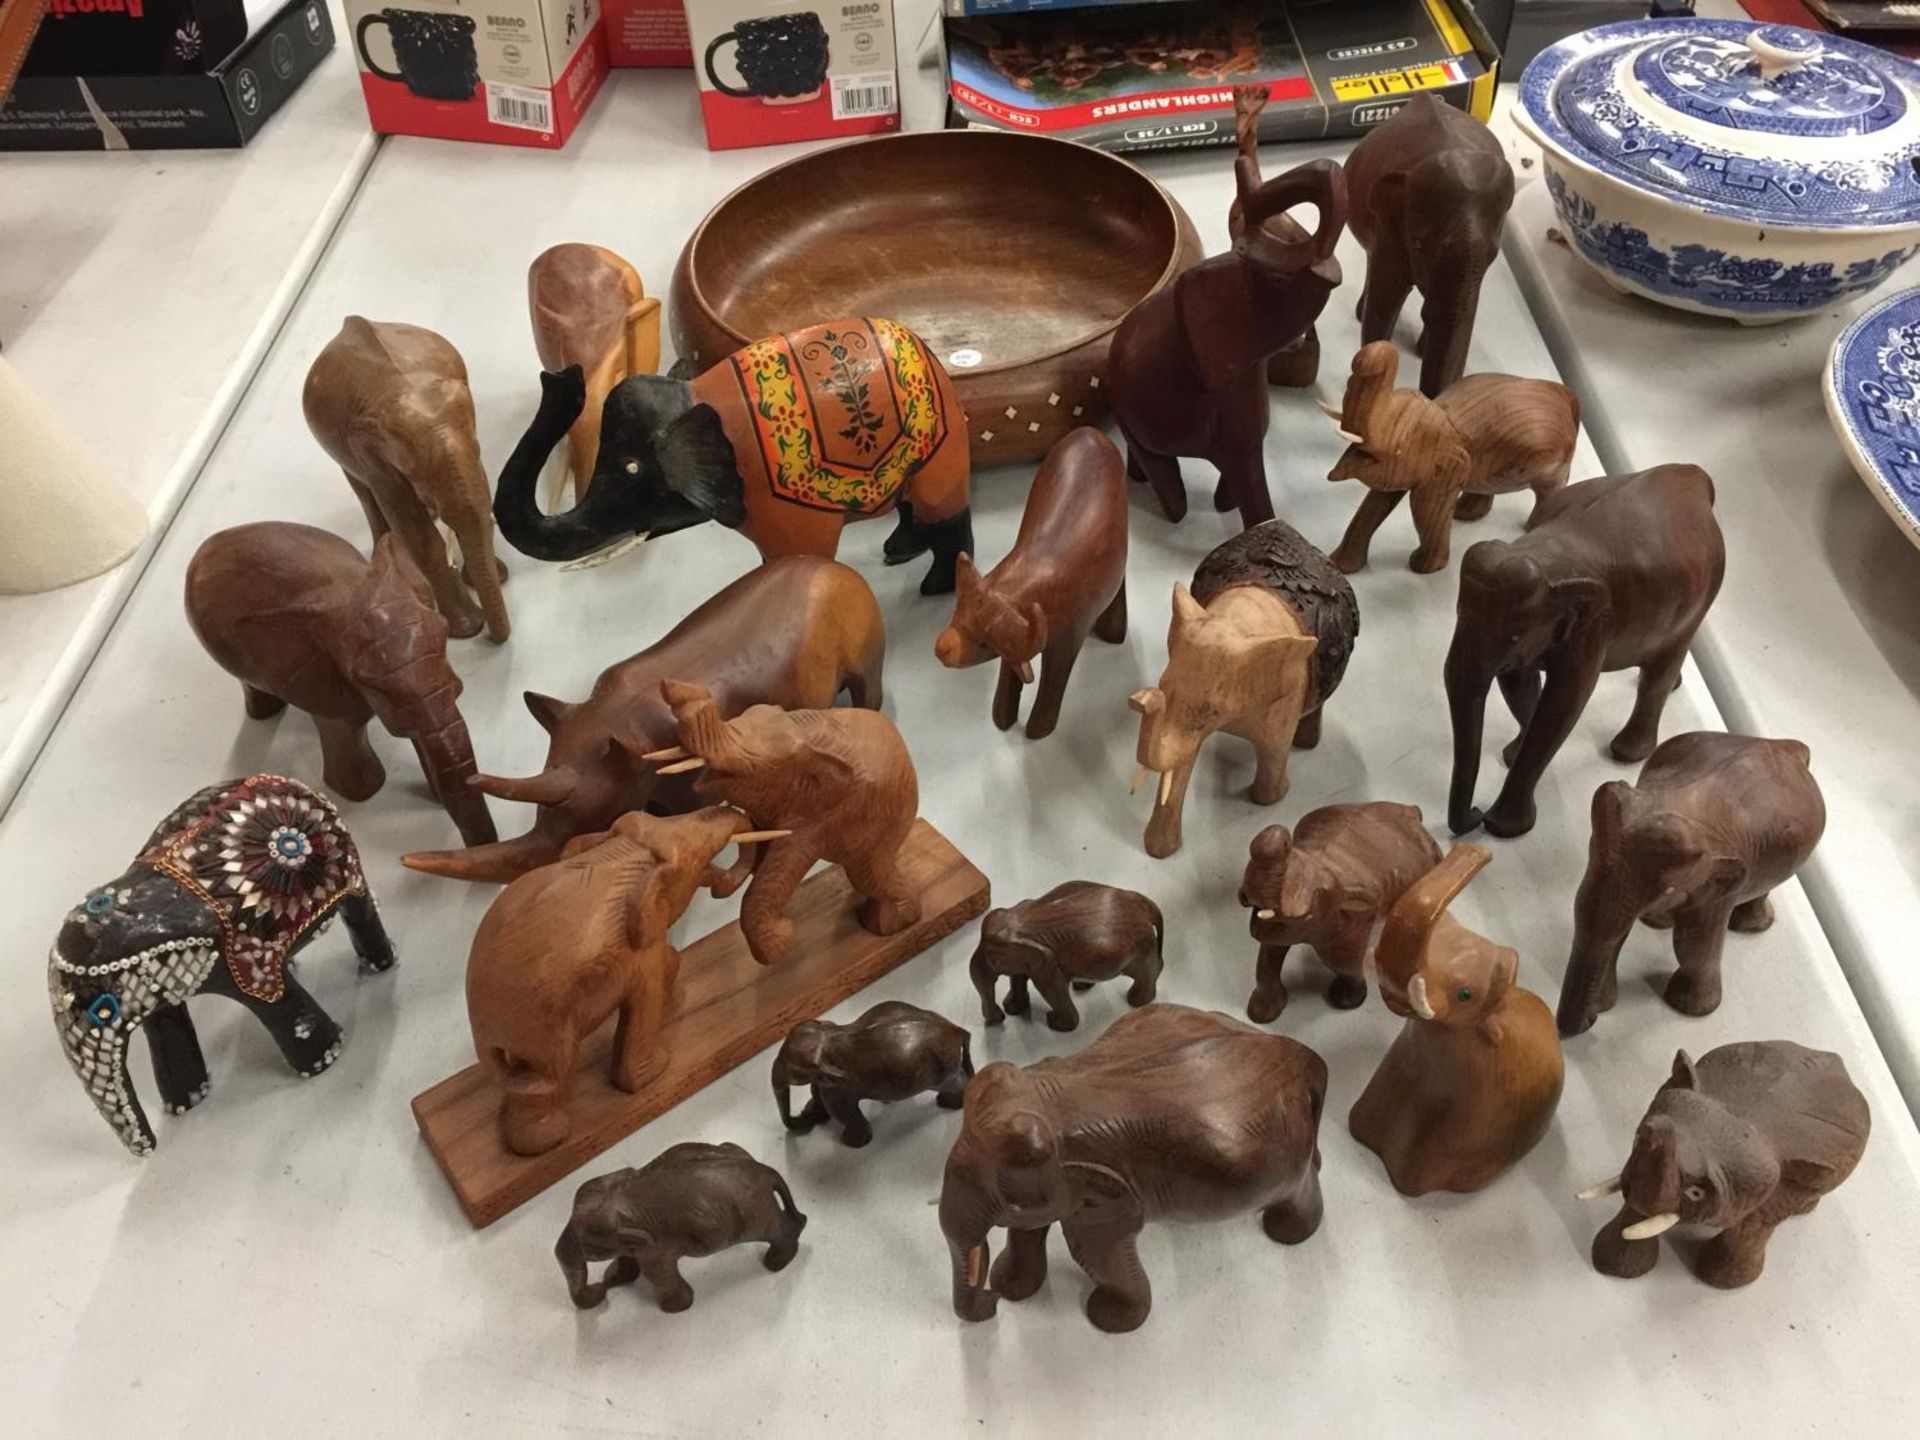 A LARGE QUANTITY OF MAINLY WOODEN ELEPHANTS